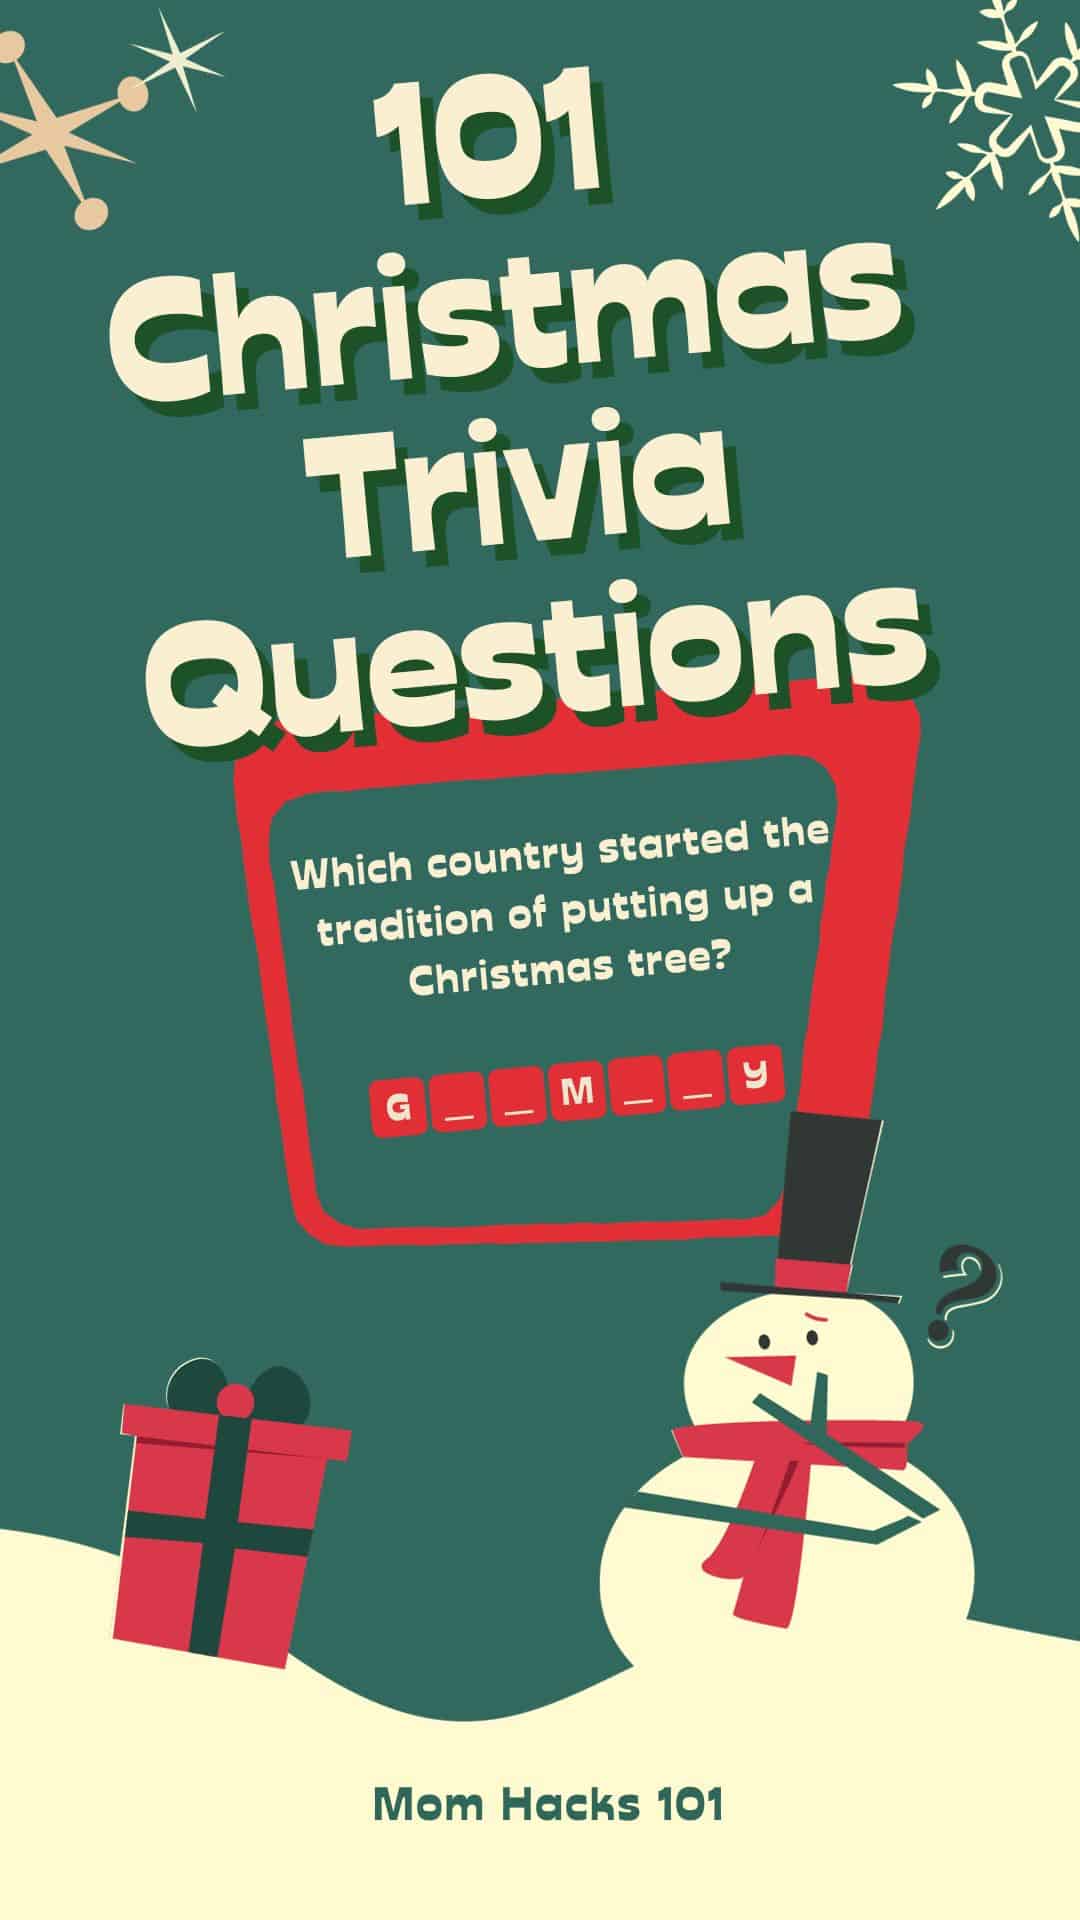 Christmas Trivia Questions and answers